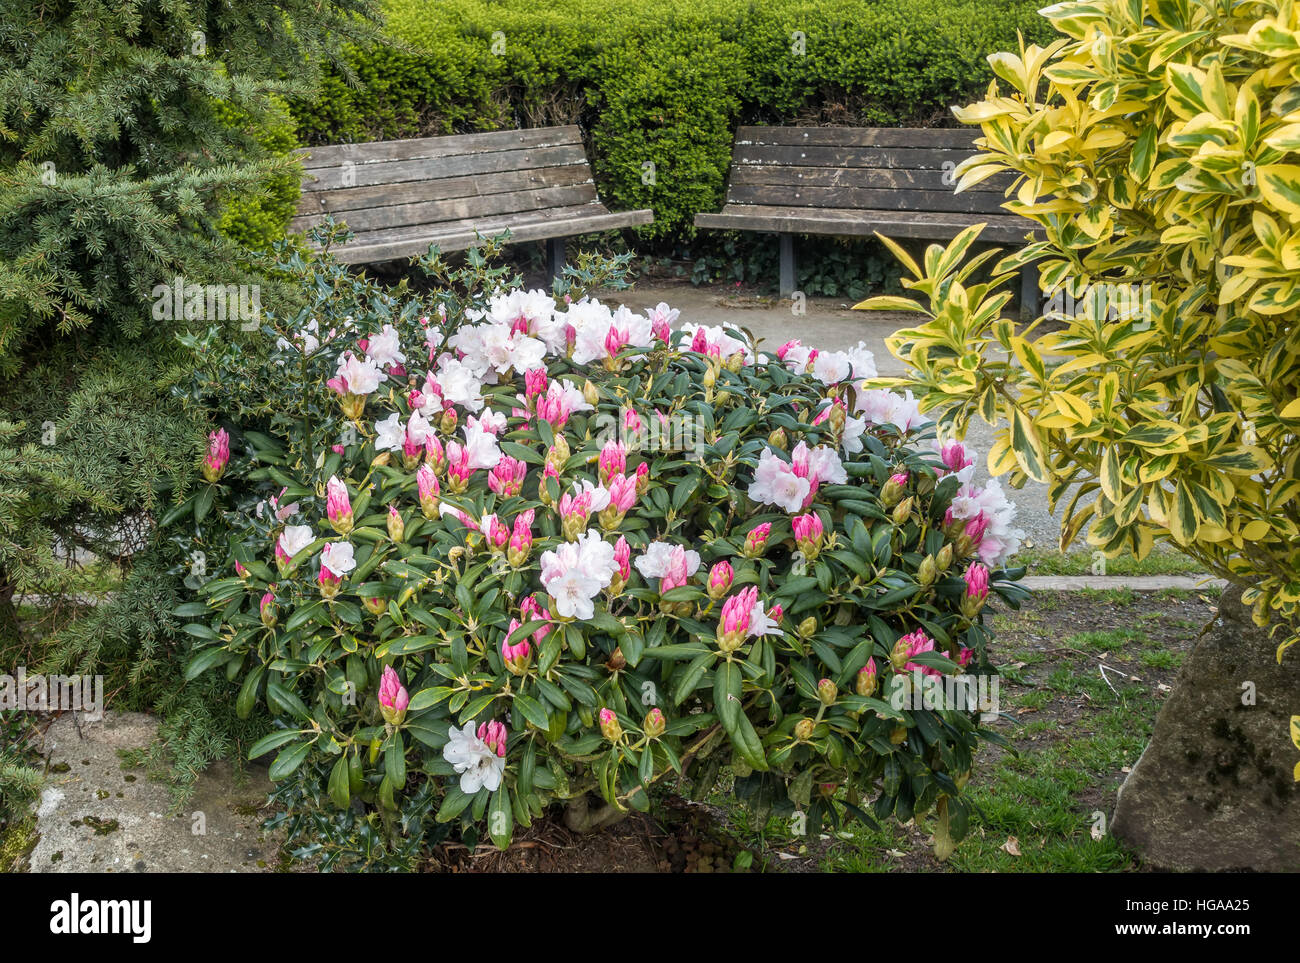 A view of a pink and white Rhododendron bush and wooden benches, Stock Photo